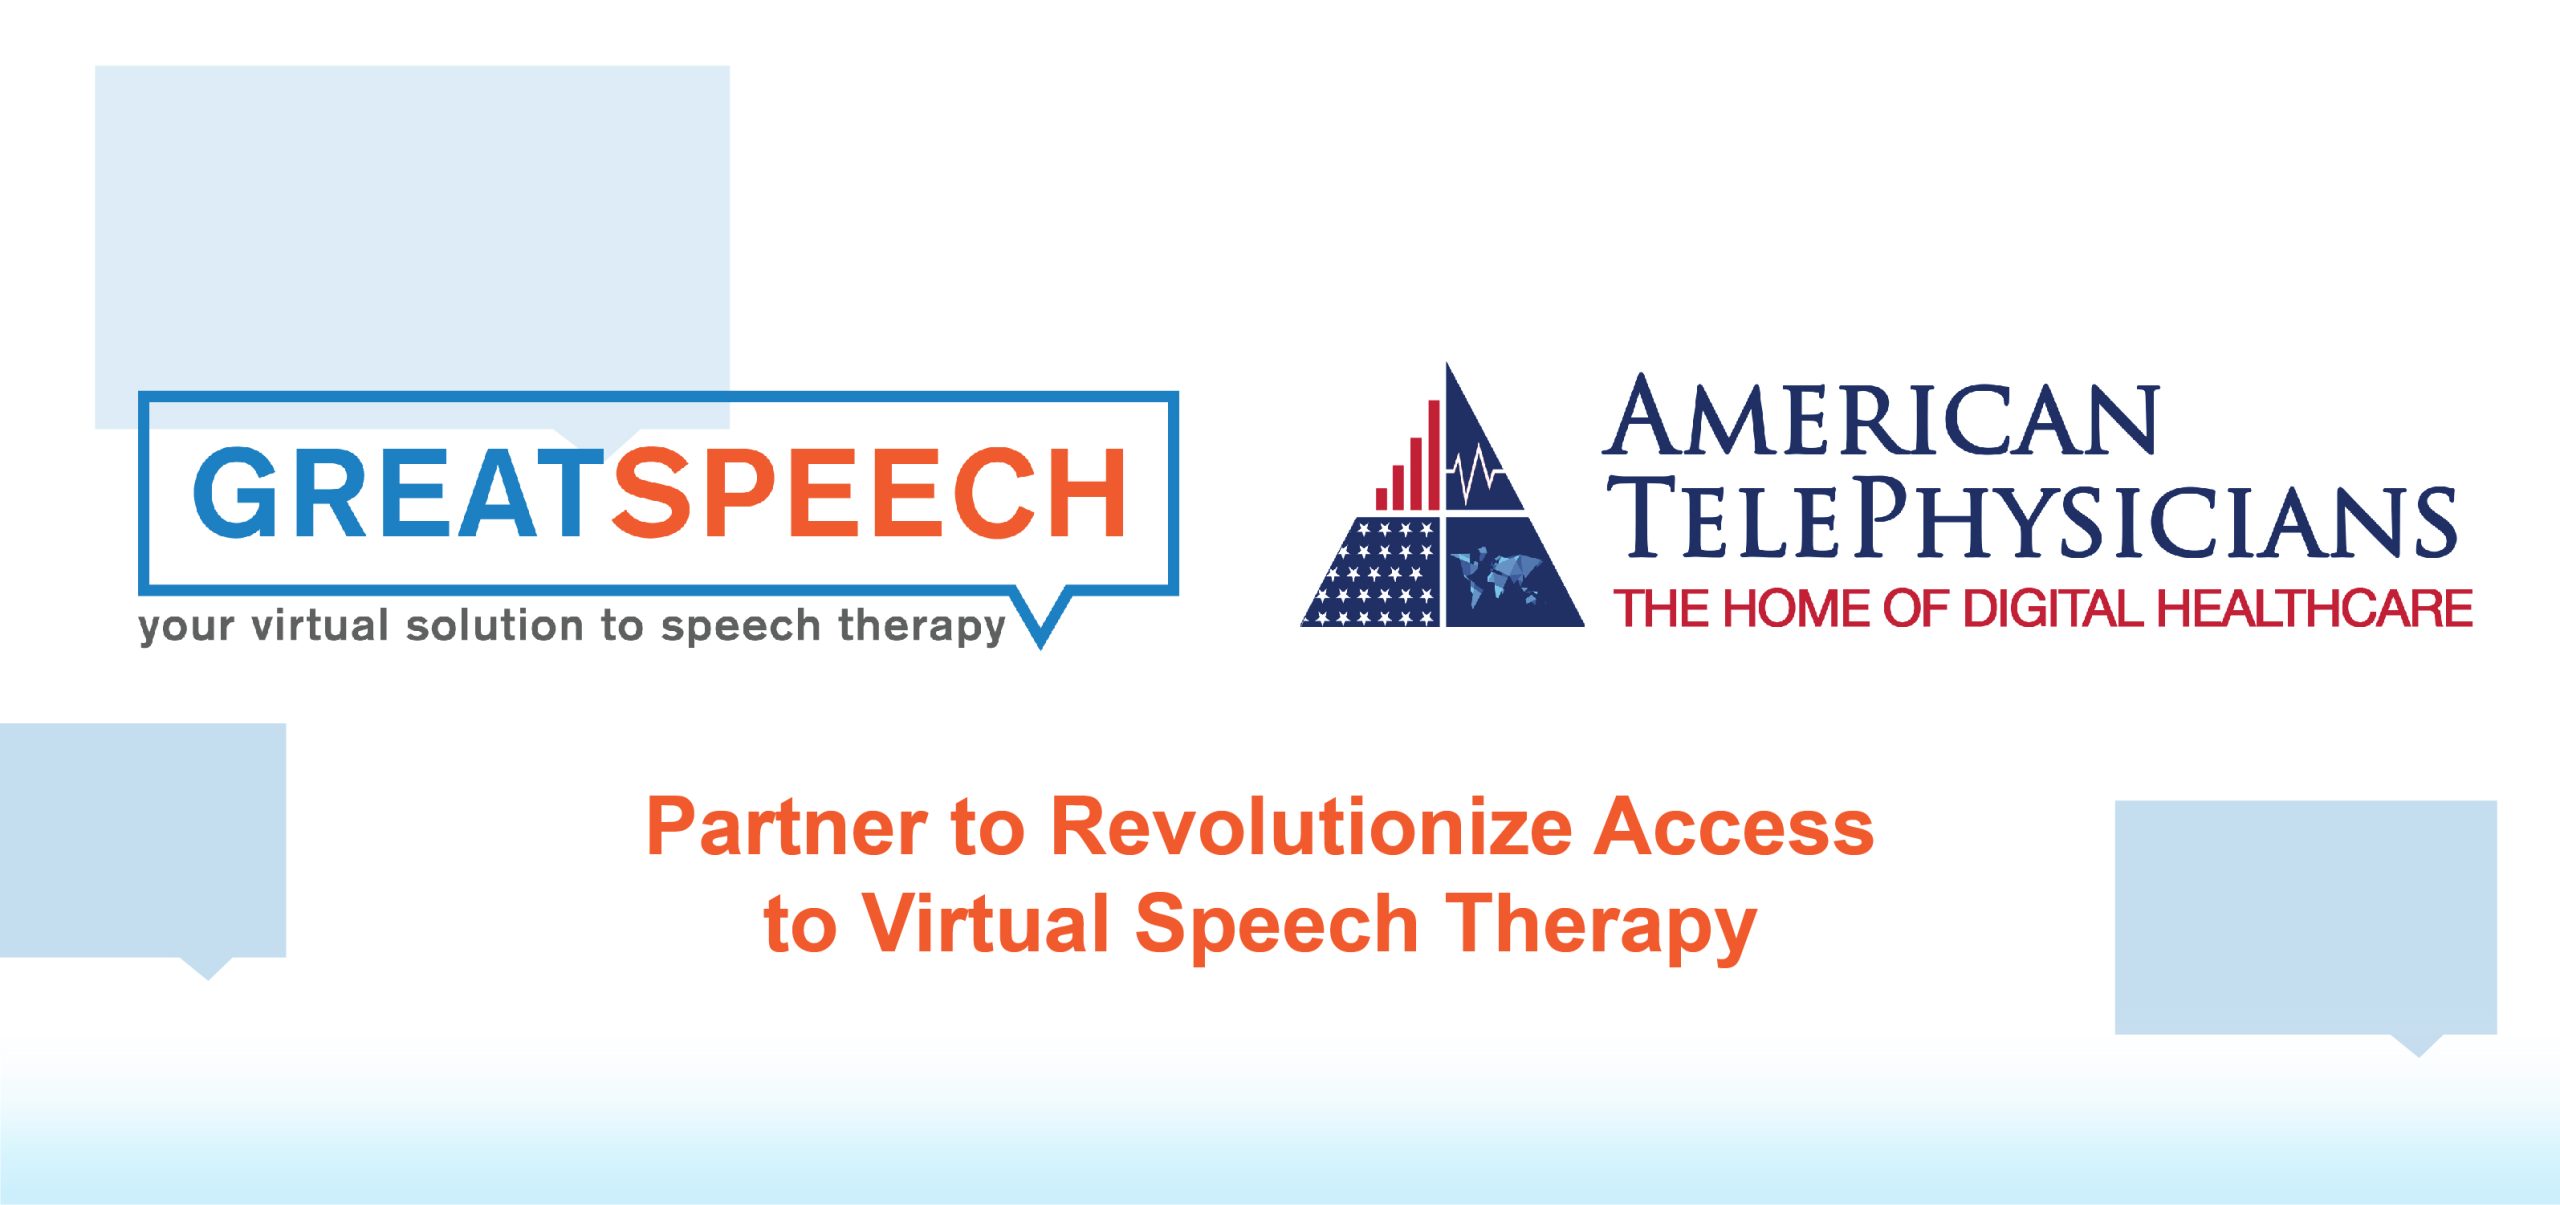 Great Speech and American TelePhysicians Partner to Revolutionize Access to Virtual Speech Therapy